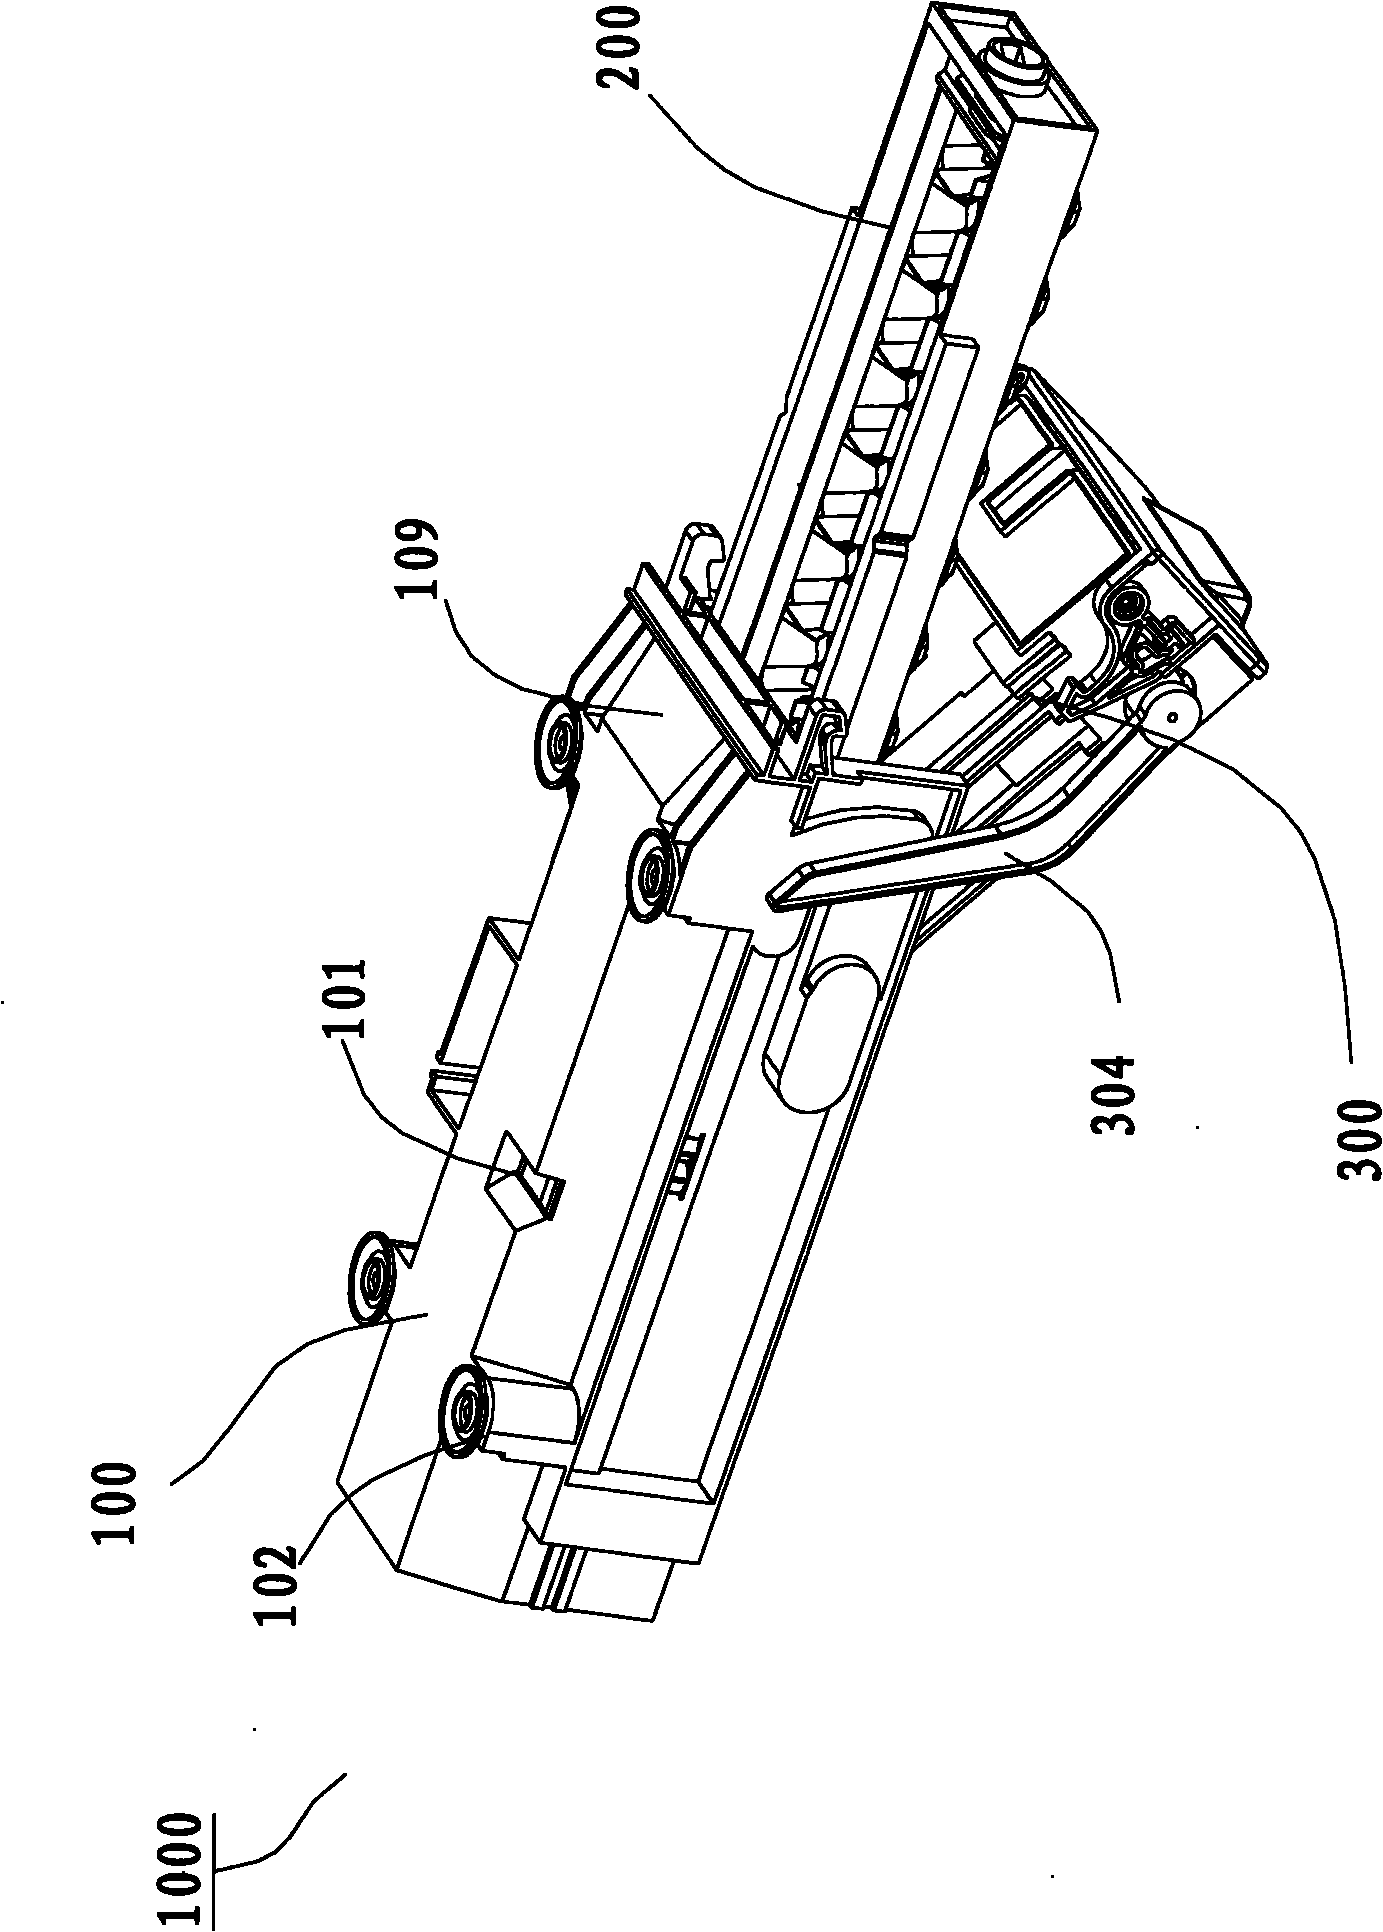 Automatic ice machine and refrigerator provided with same